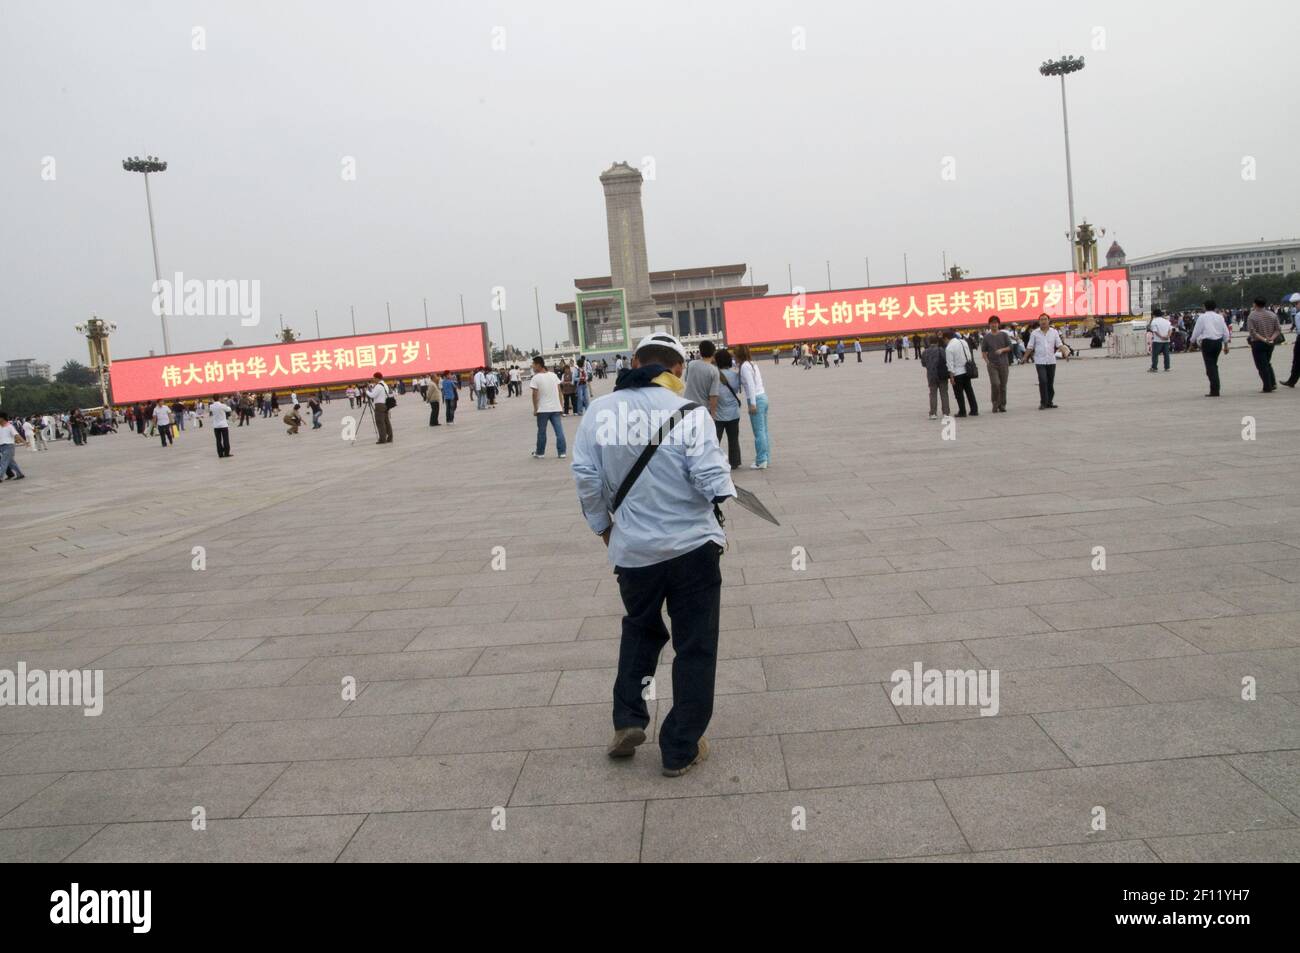 Tian An Men square, on the two screens: 'Long life to the amazing People's Republic of China'. (Photo by Raphael Fournier/Sipa USA) Stock Photo